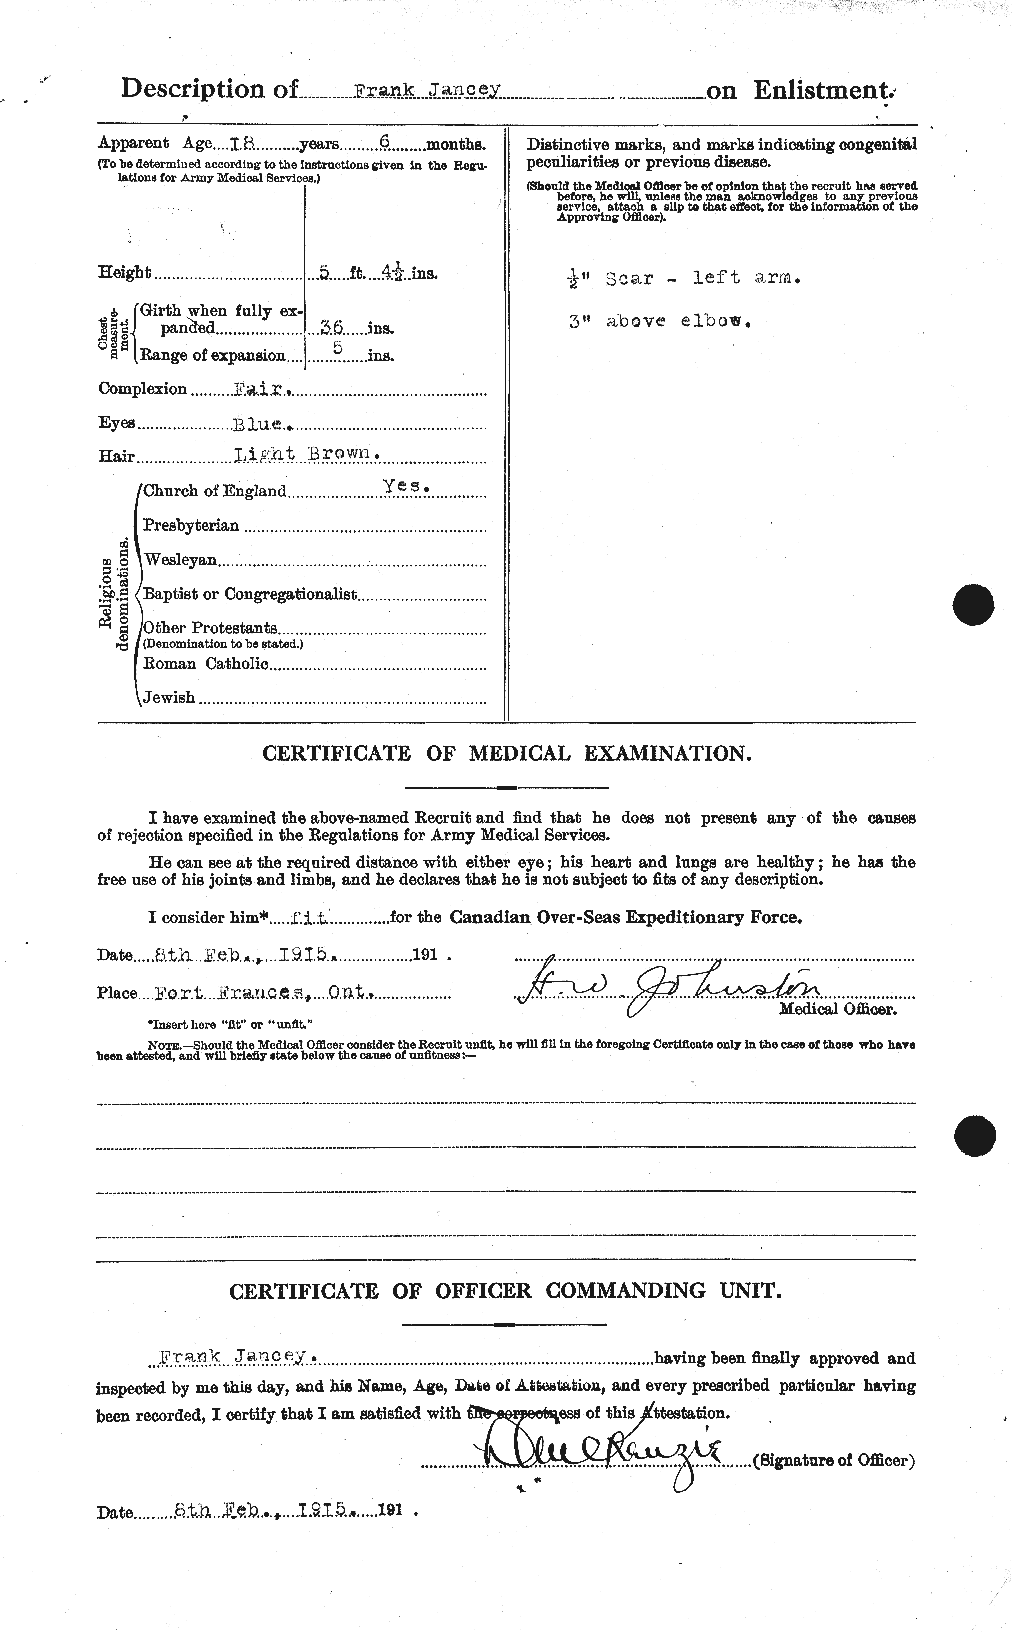 Personnel Records of the First World War - CEF 415336b